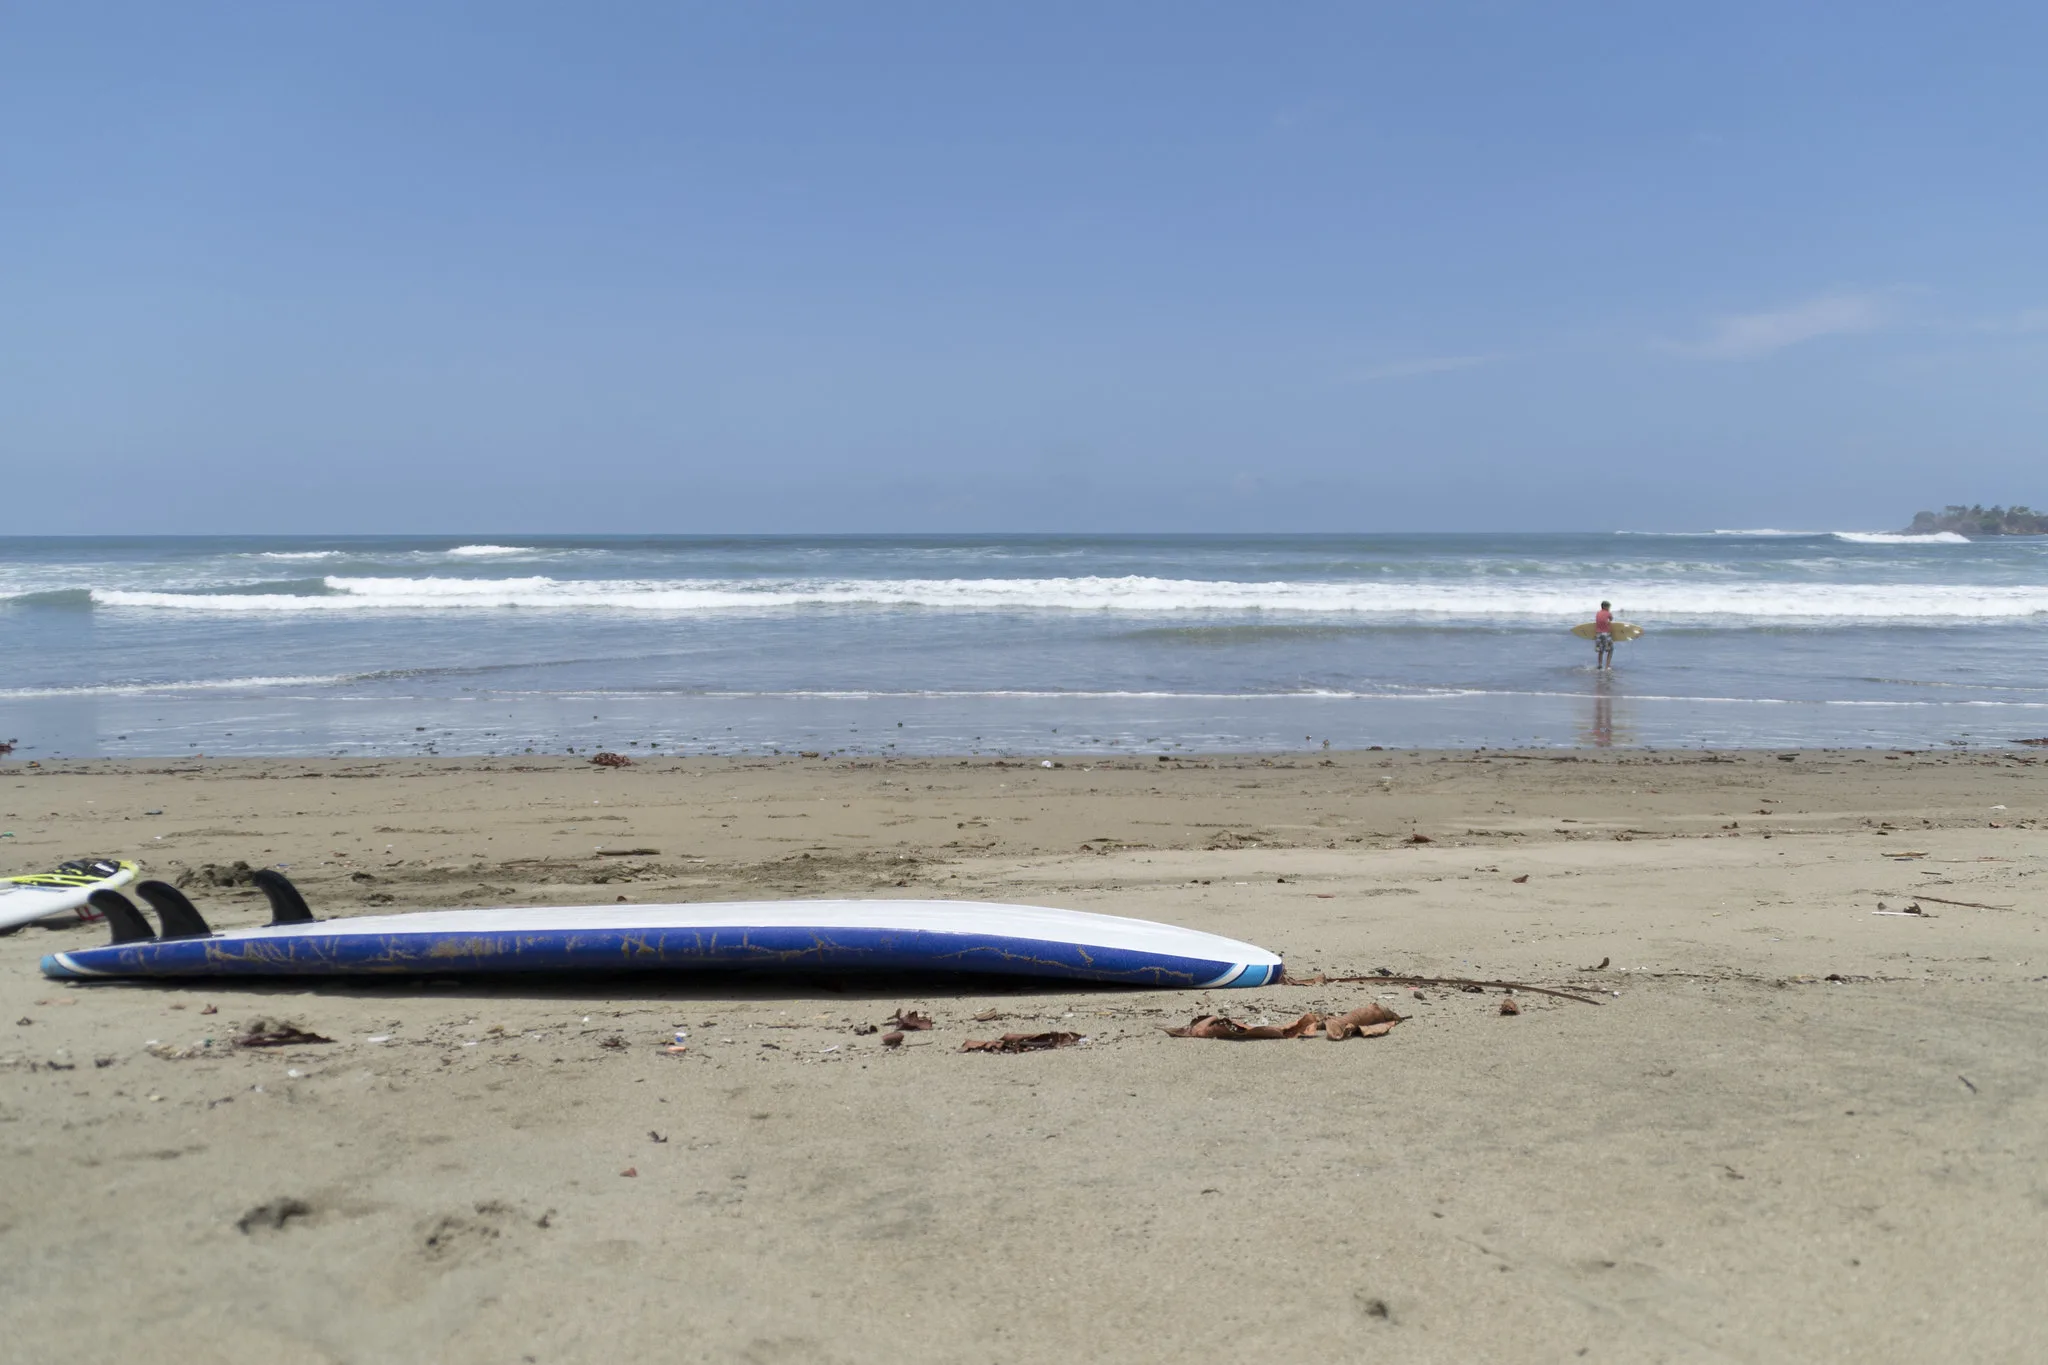 A surfboard lying on fine beach and in background, a man carrying his surfboard on a clear day at Playa Iguanita, one of the best beaches in Costa Rica